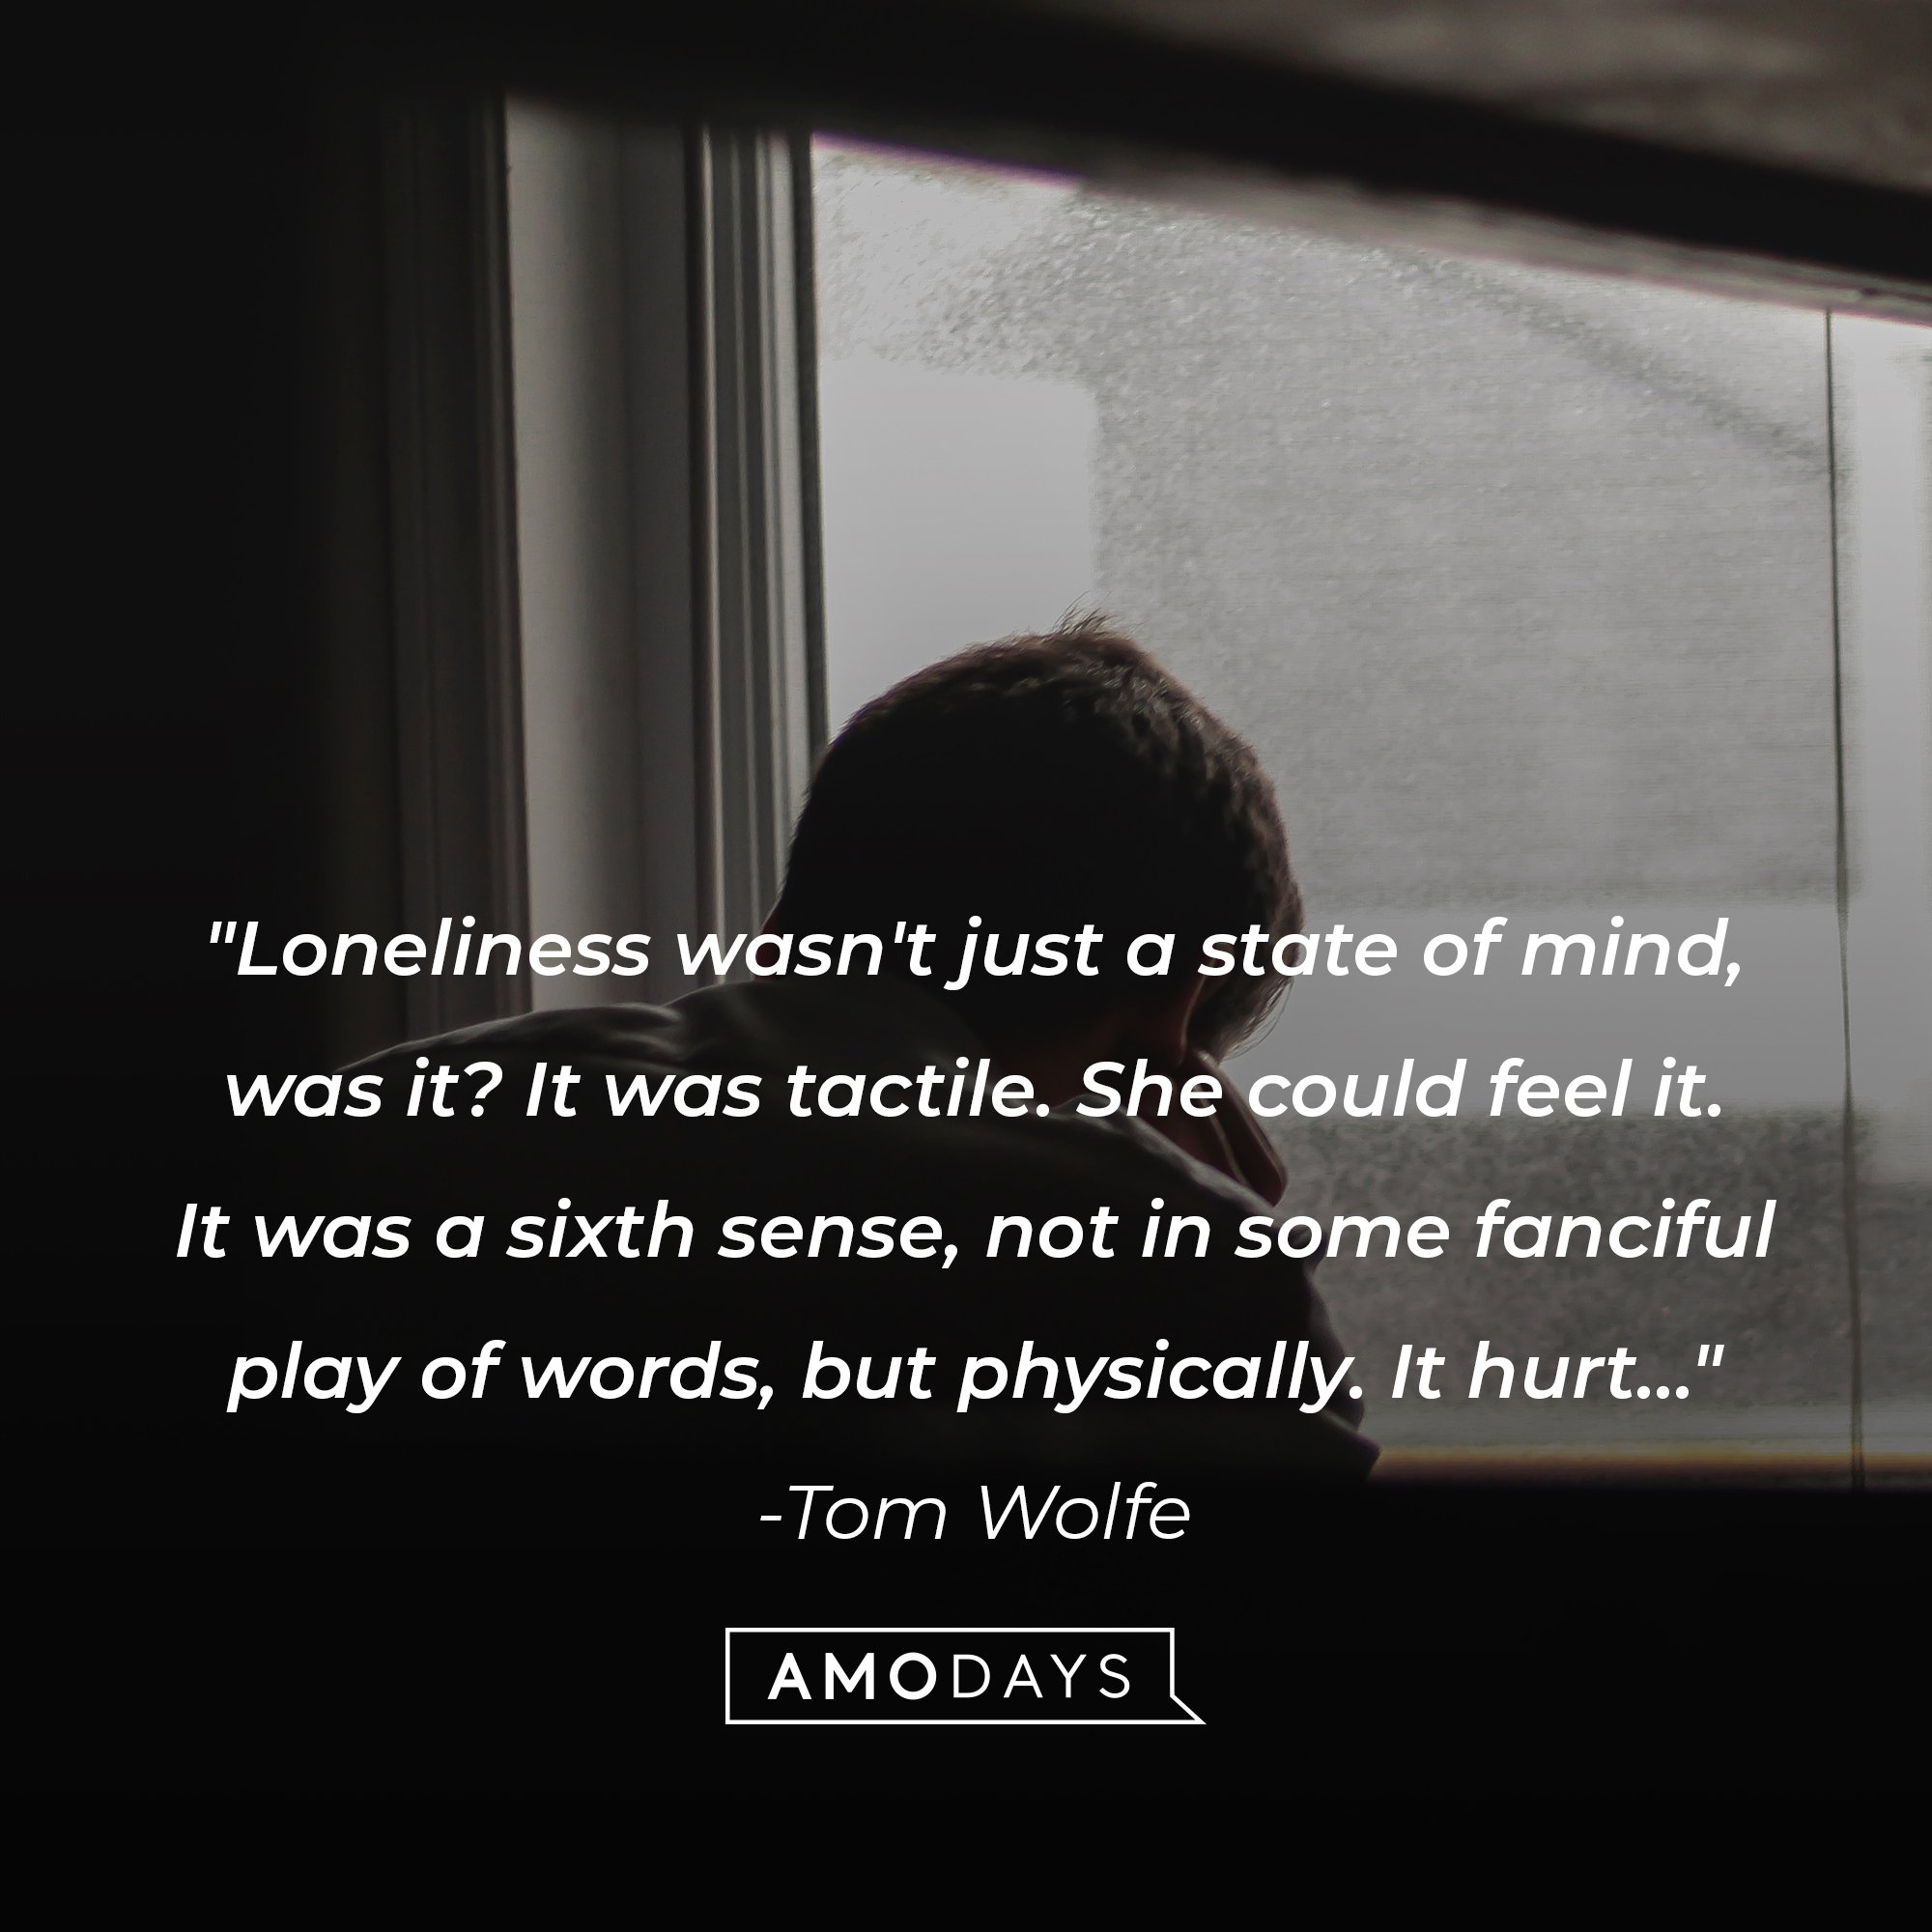 Tom Wolfe’s quote: "Loneliness wasn't just a state of mind, was it? It was tactile. She could feel it. It was a sixth sense, not in some fanciful play of words, but physically. It hurt…" |  Image: AmoDays 